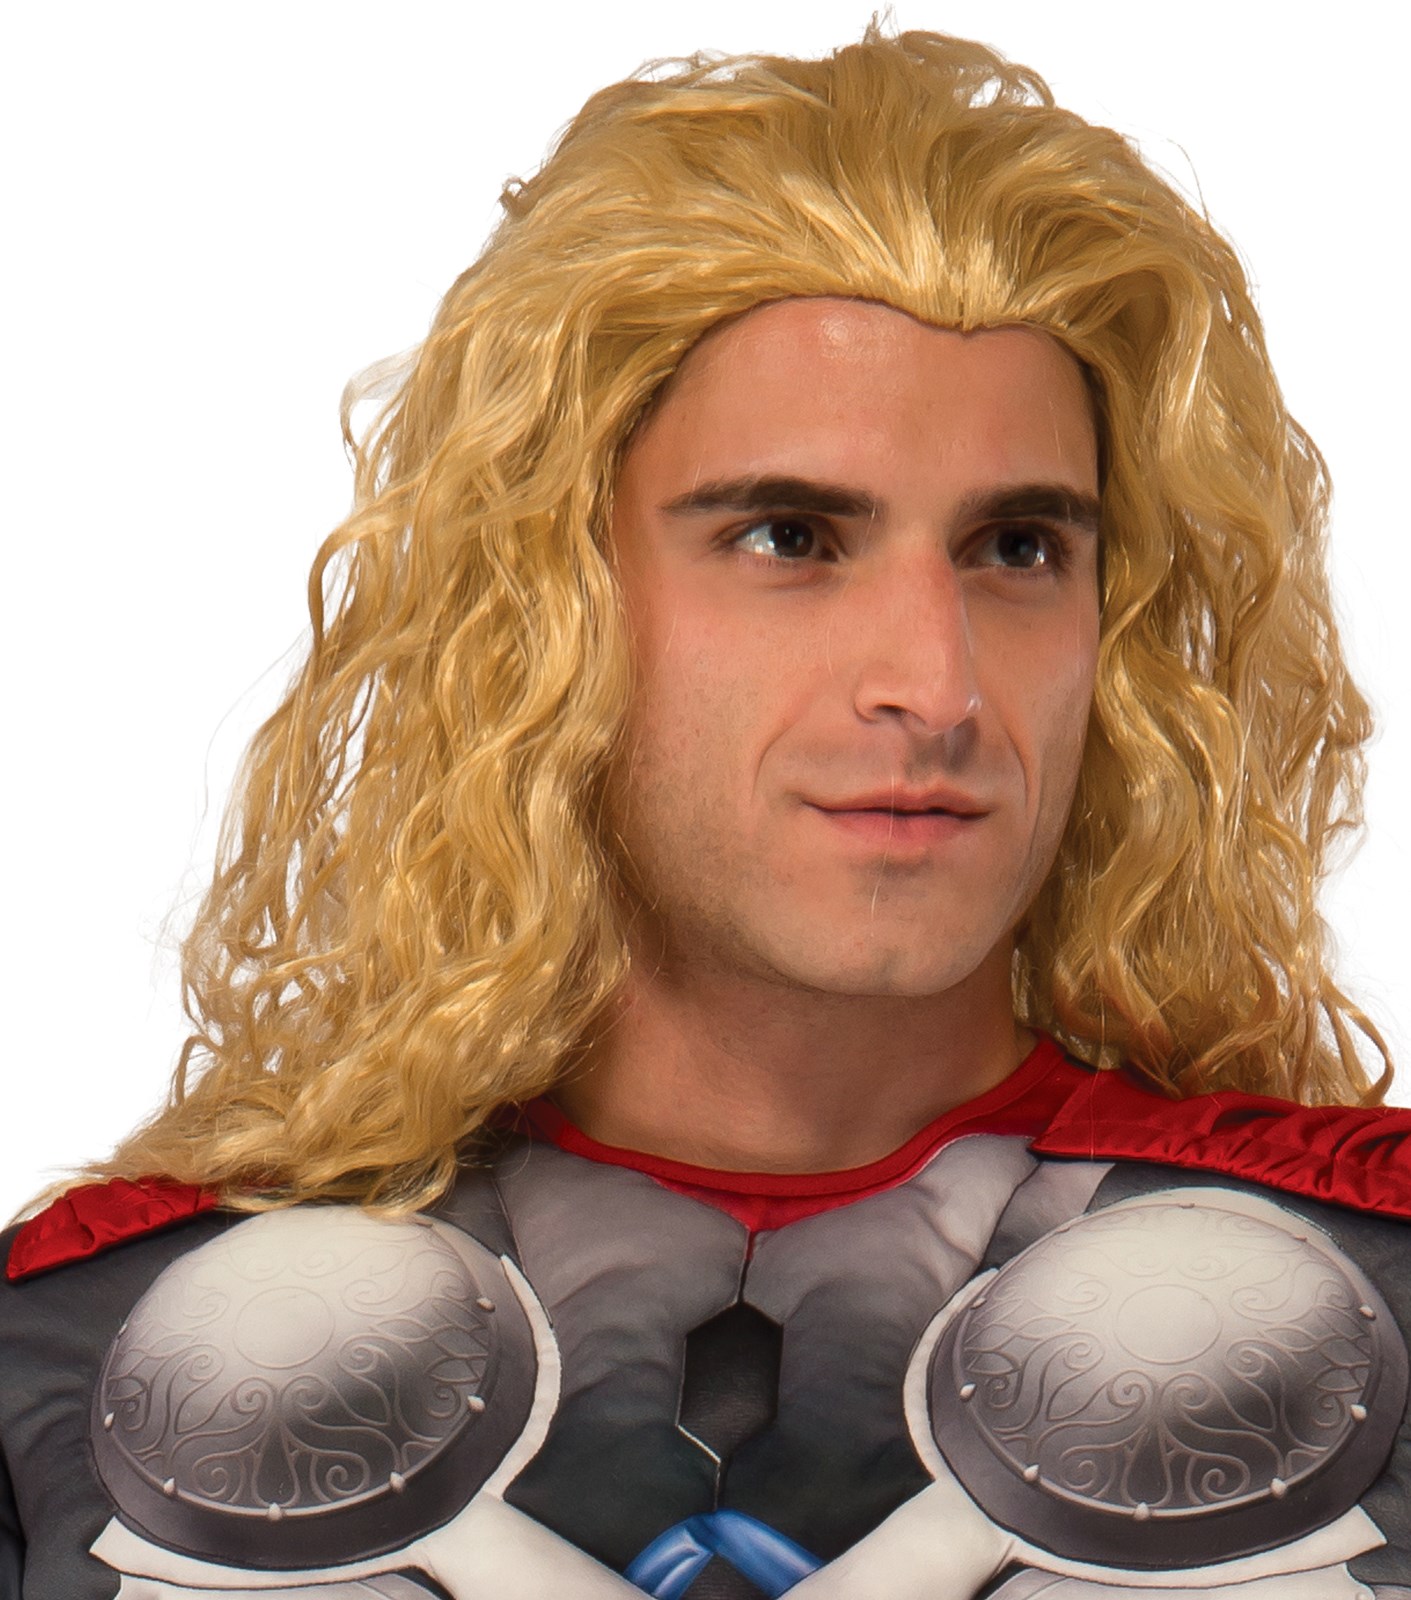 Avengers 2 - Age of Ultron: Thor Wig For Men